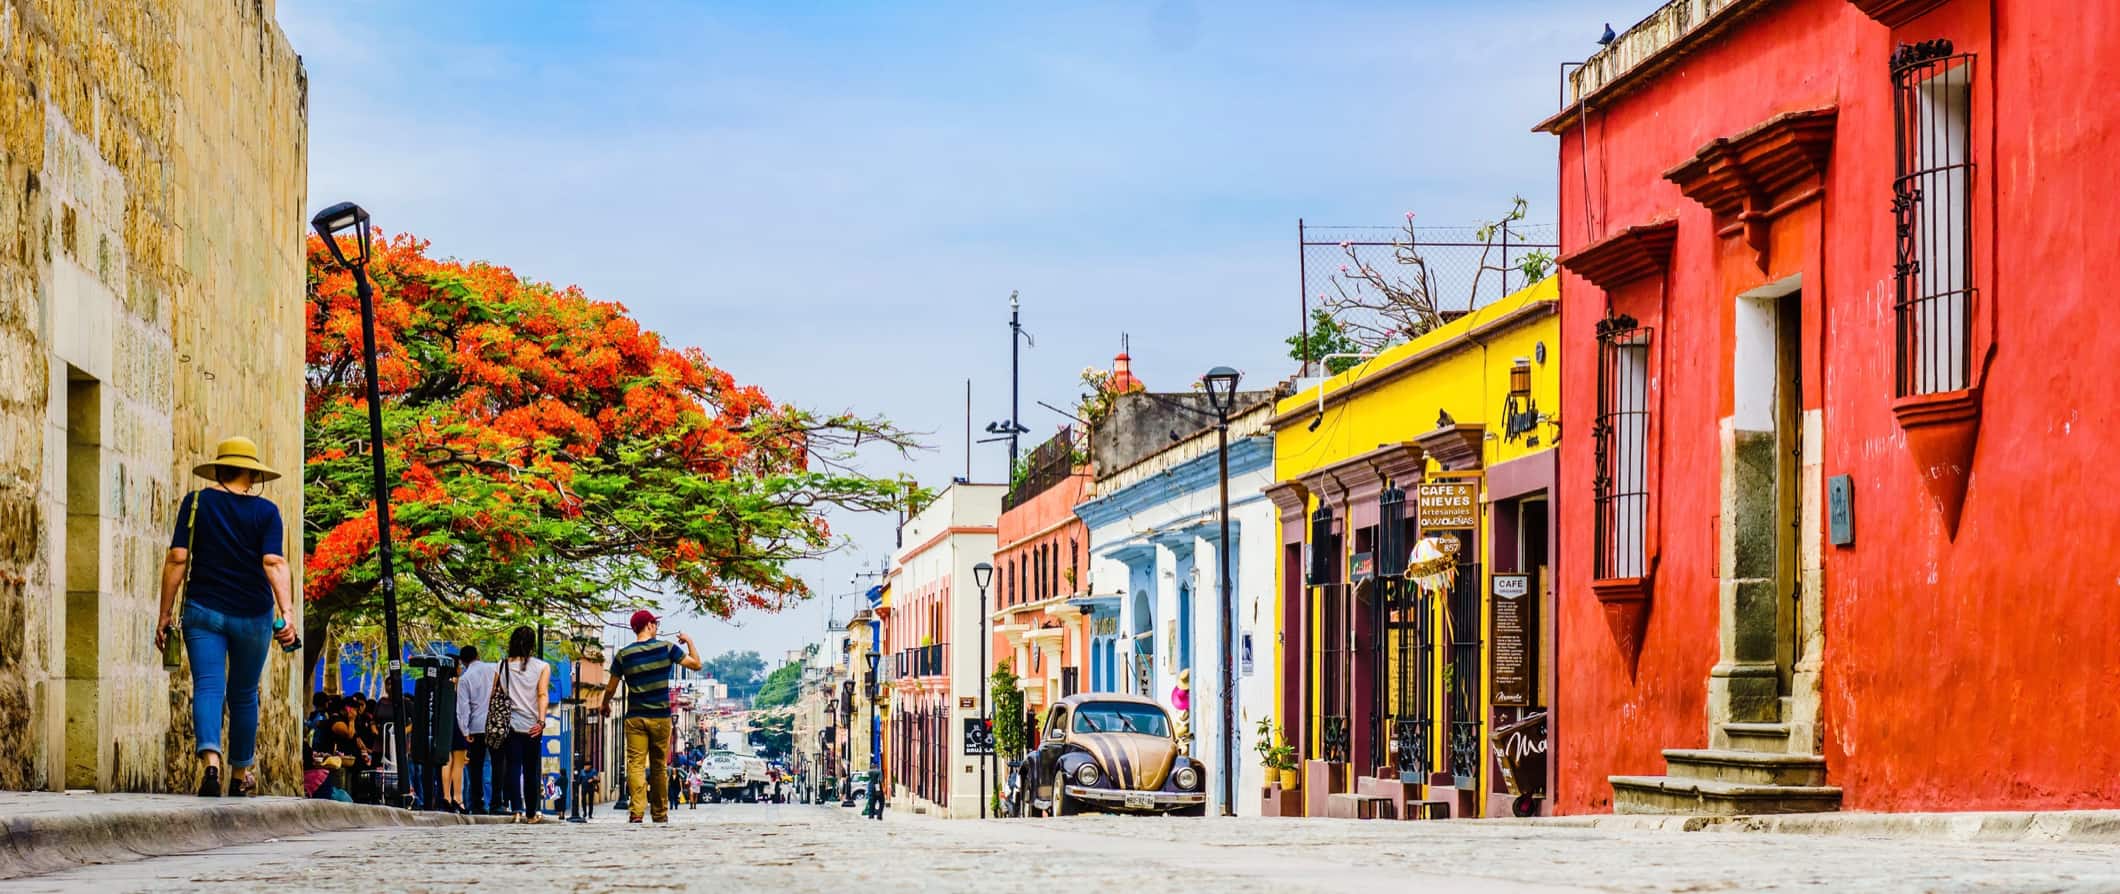 The colorful historic downtown of Oaxaca, Mexico